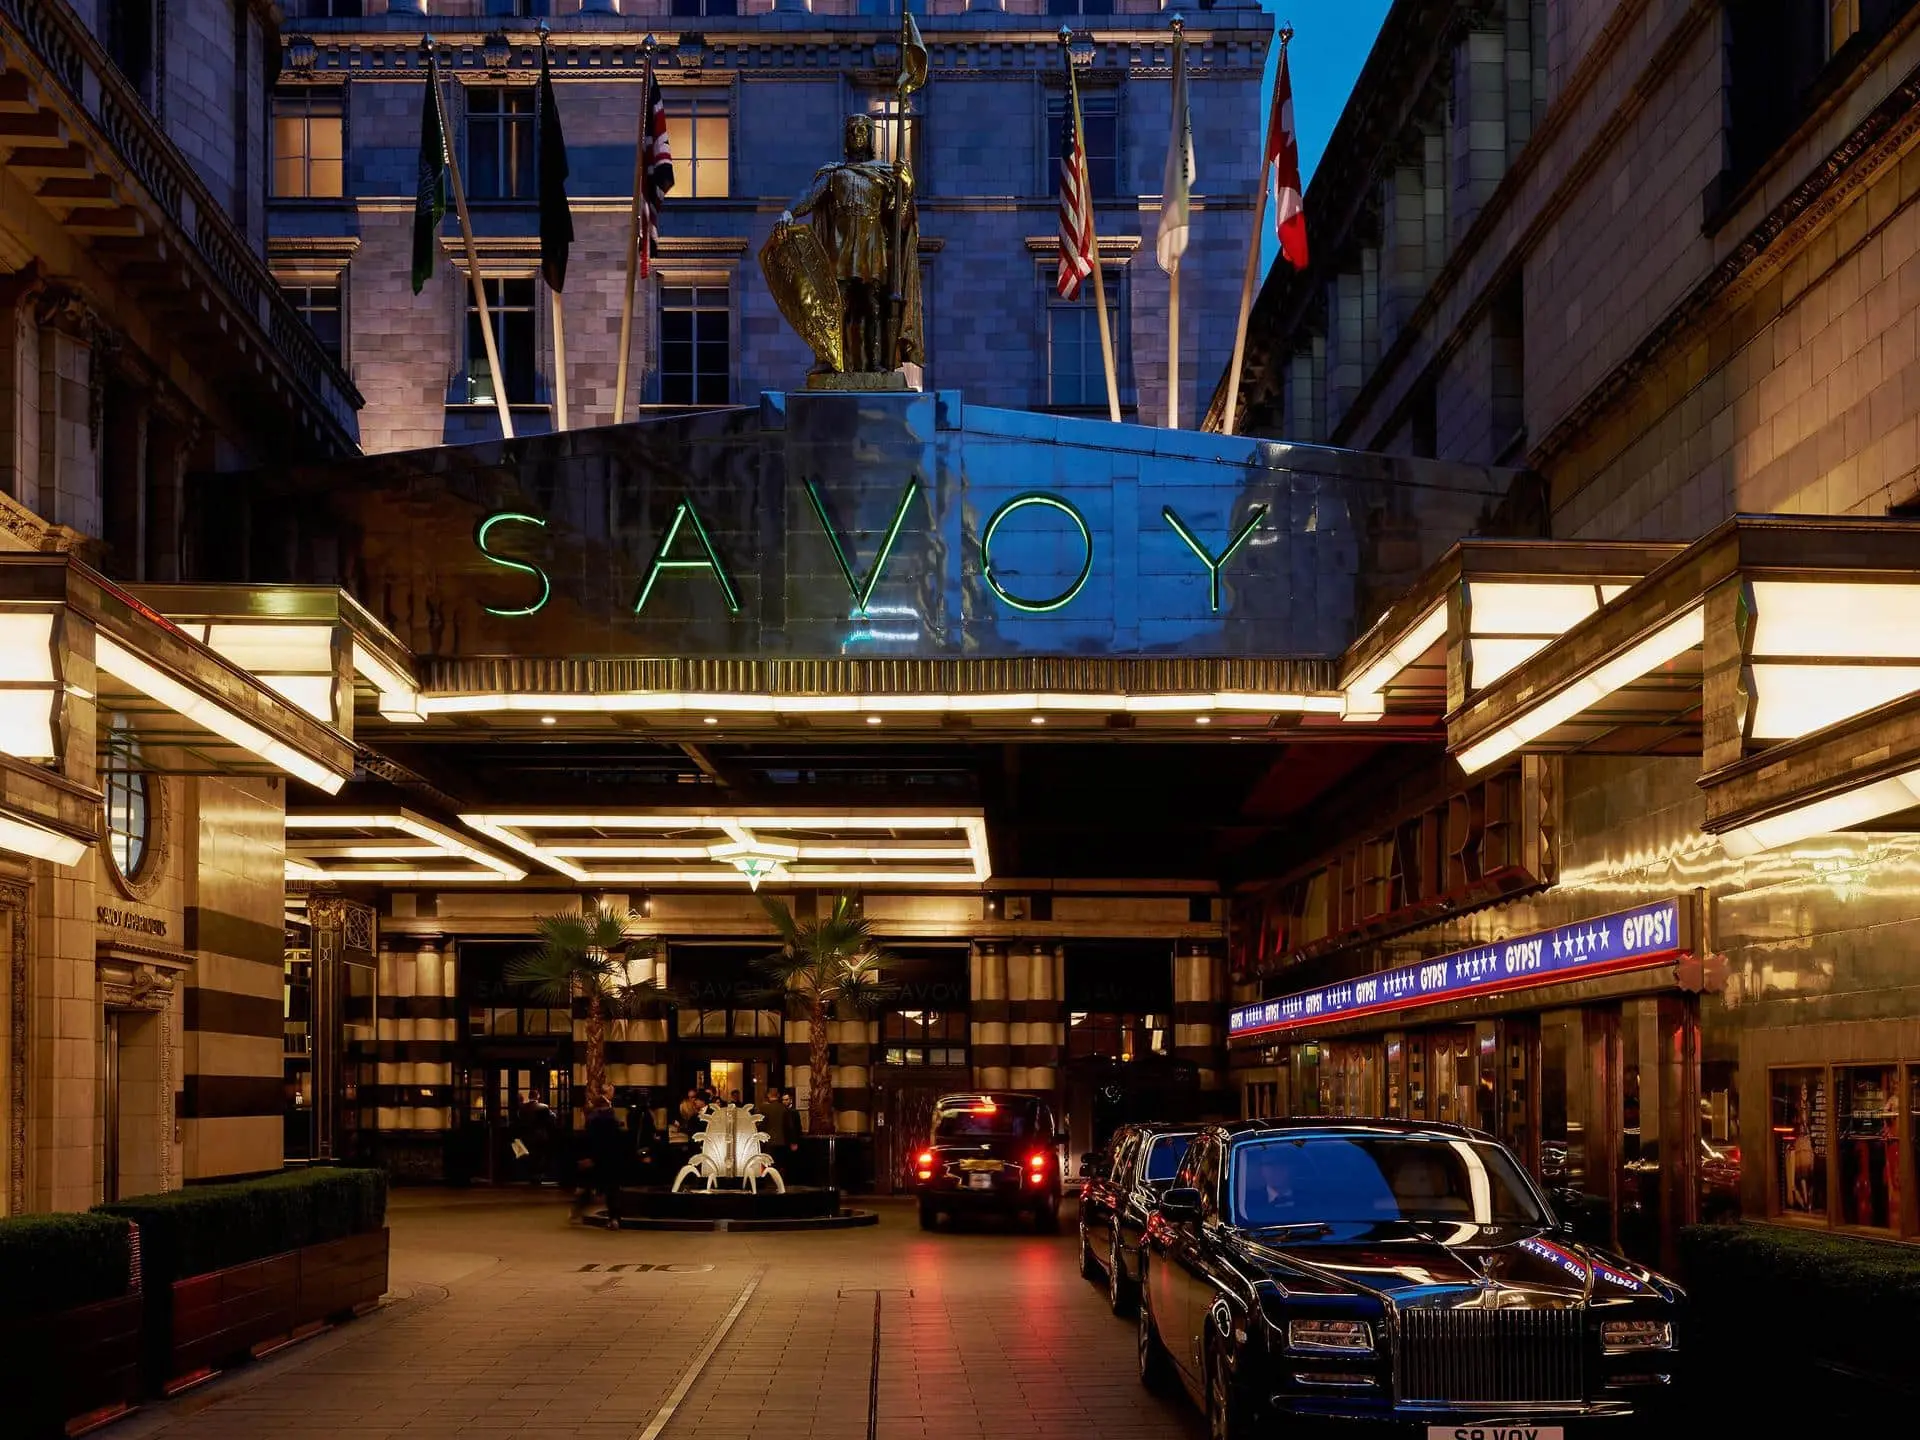 The Savoy_London_Exterior 01_VIP Trips for Kids